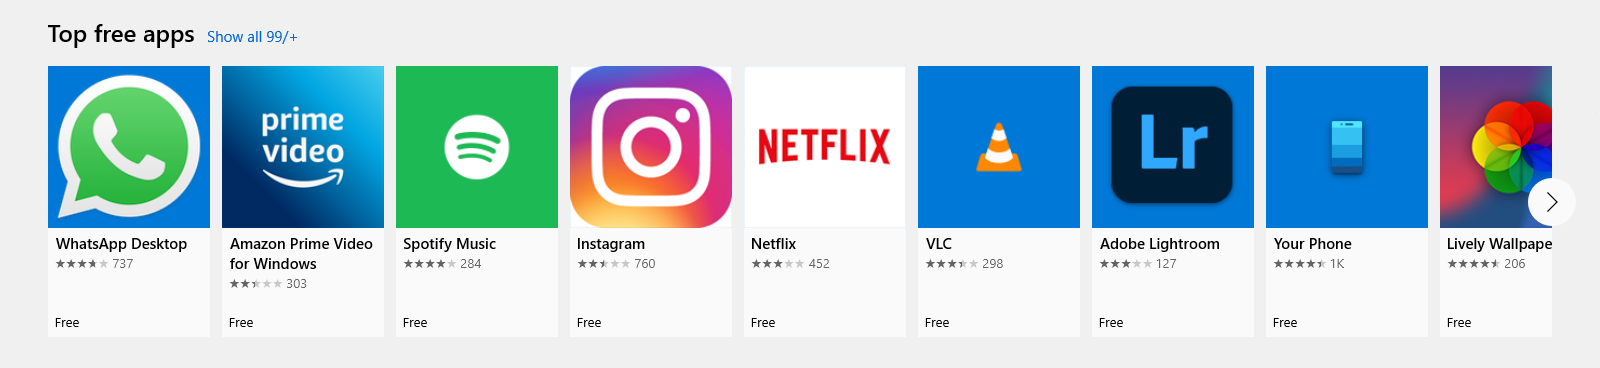 Tops Free Apps